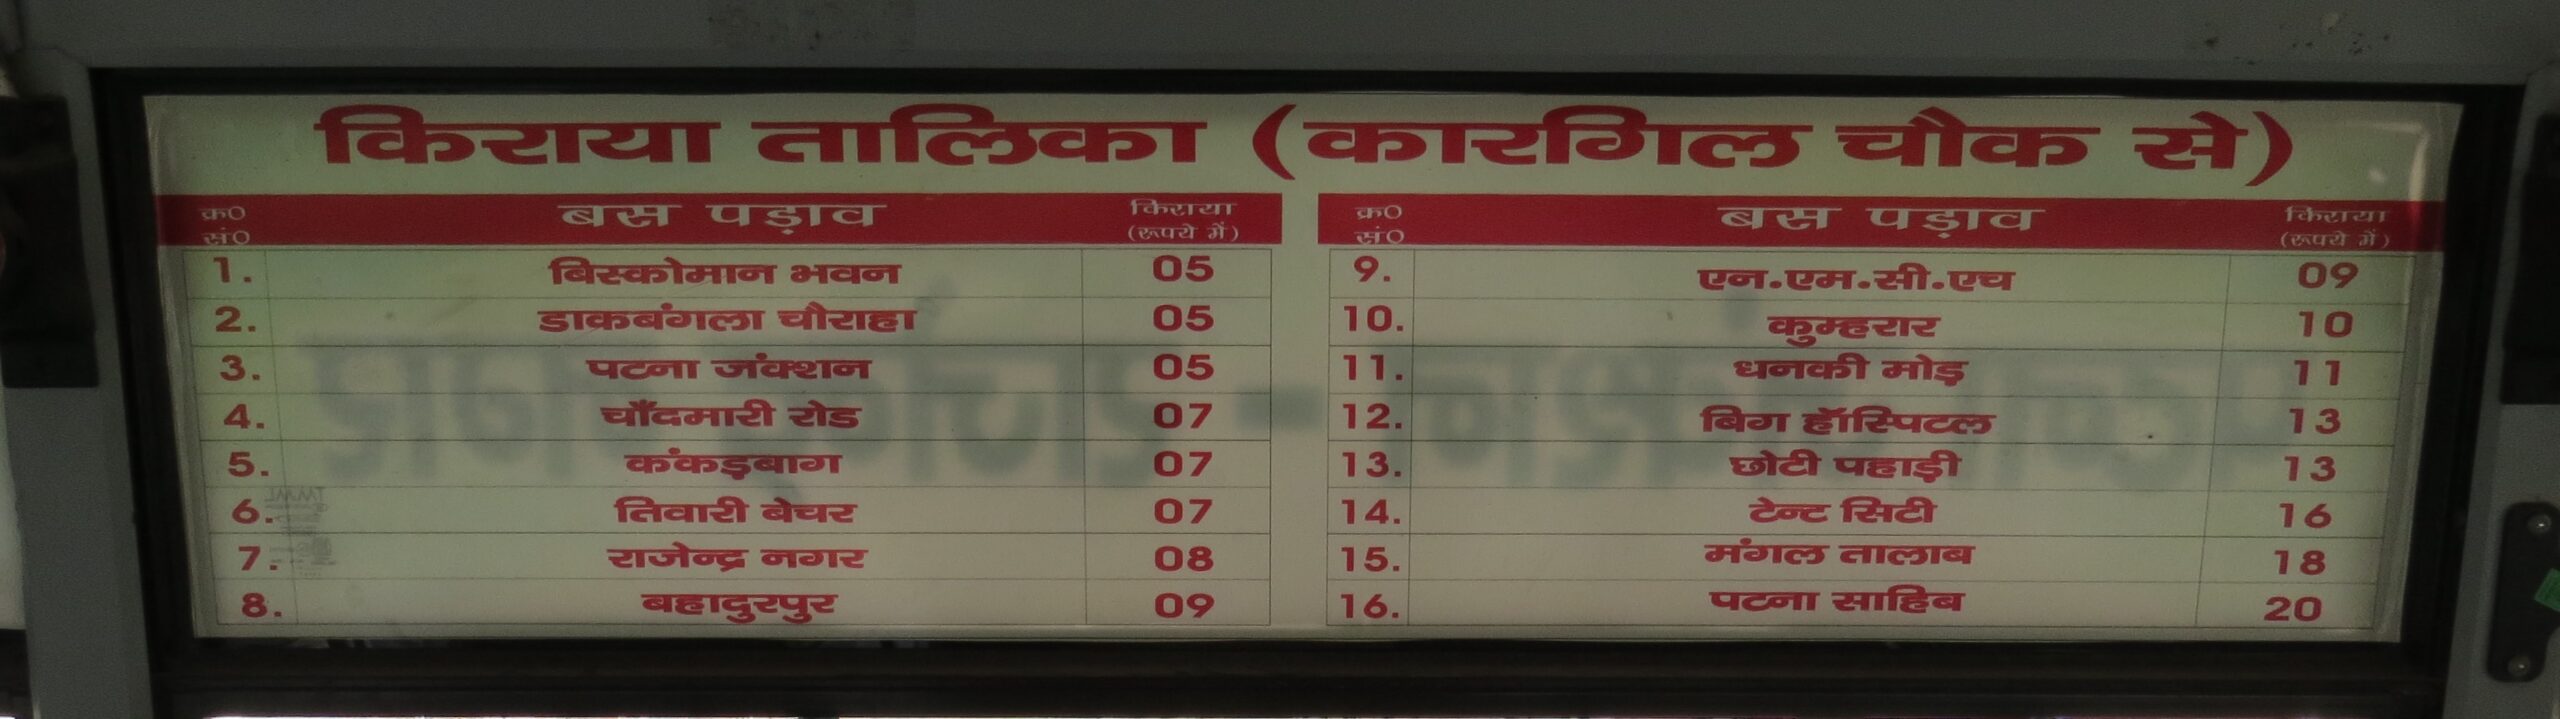 Fare Table of Bus Number 555 from Kargil Chowk